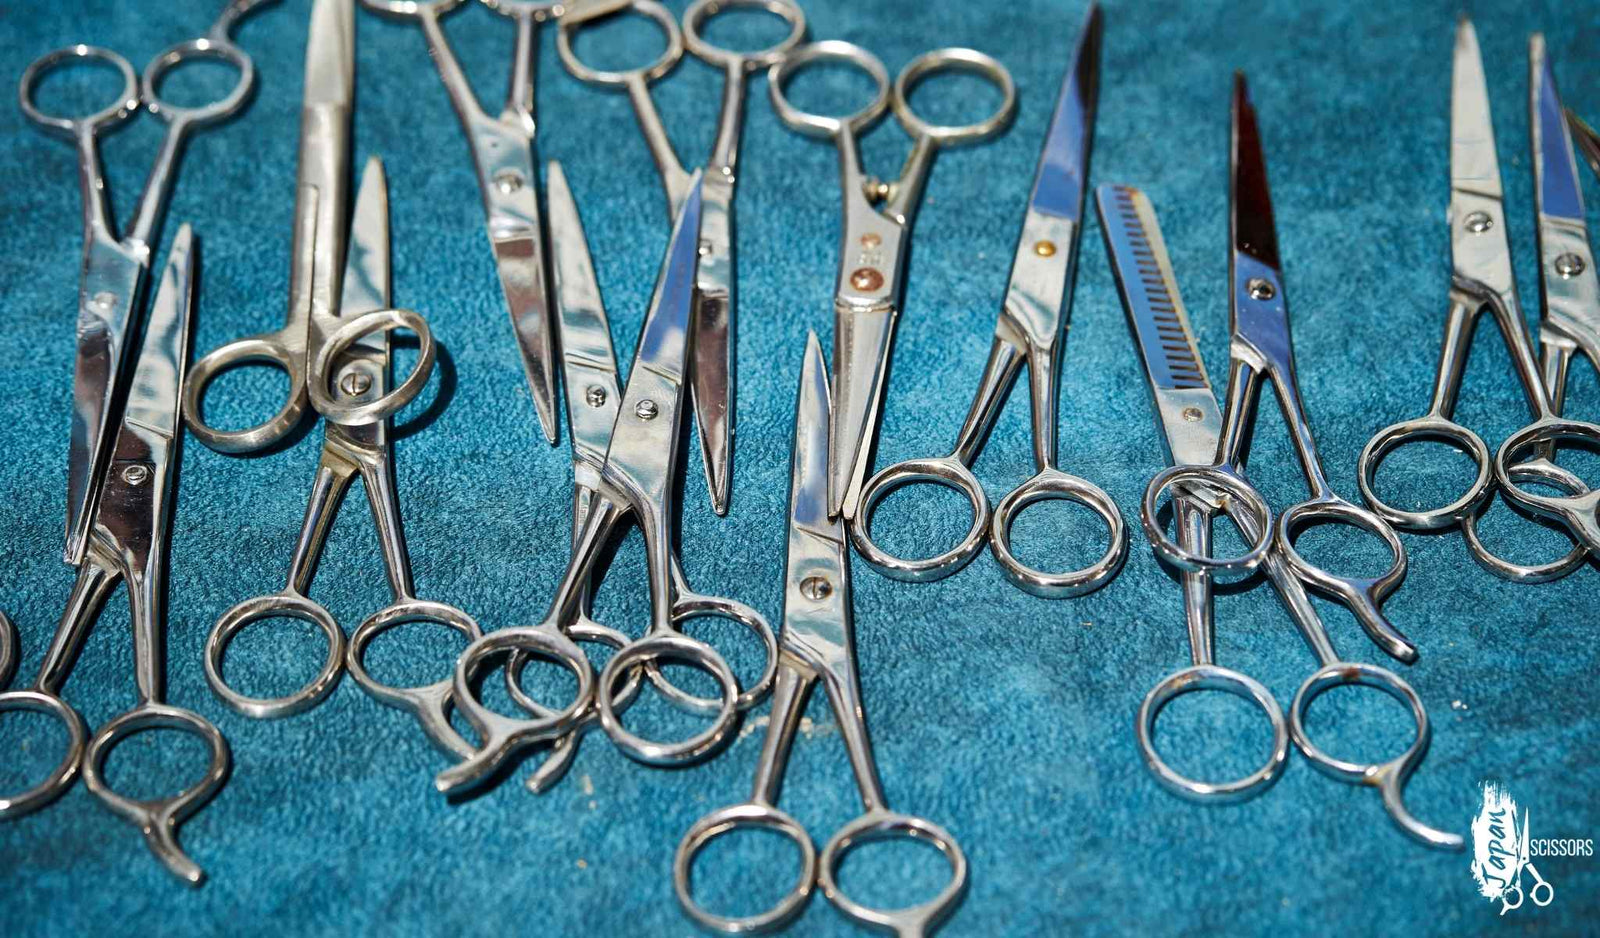 Is “I used a scissor” correct? What does it refer to? - Quora